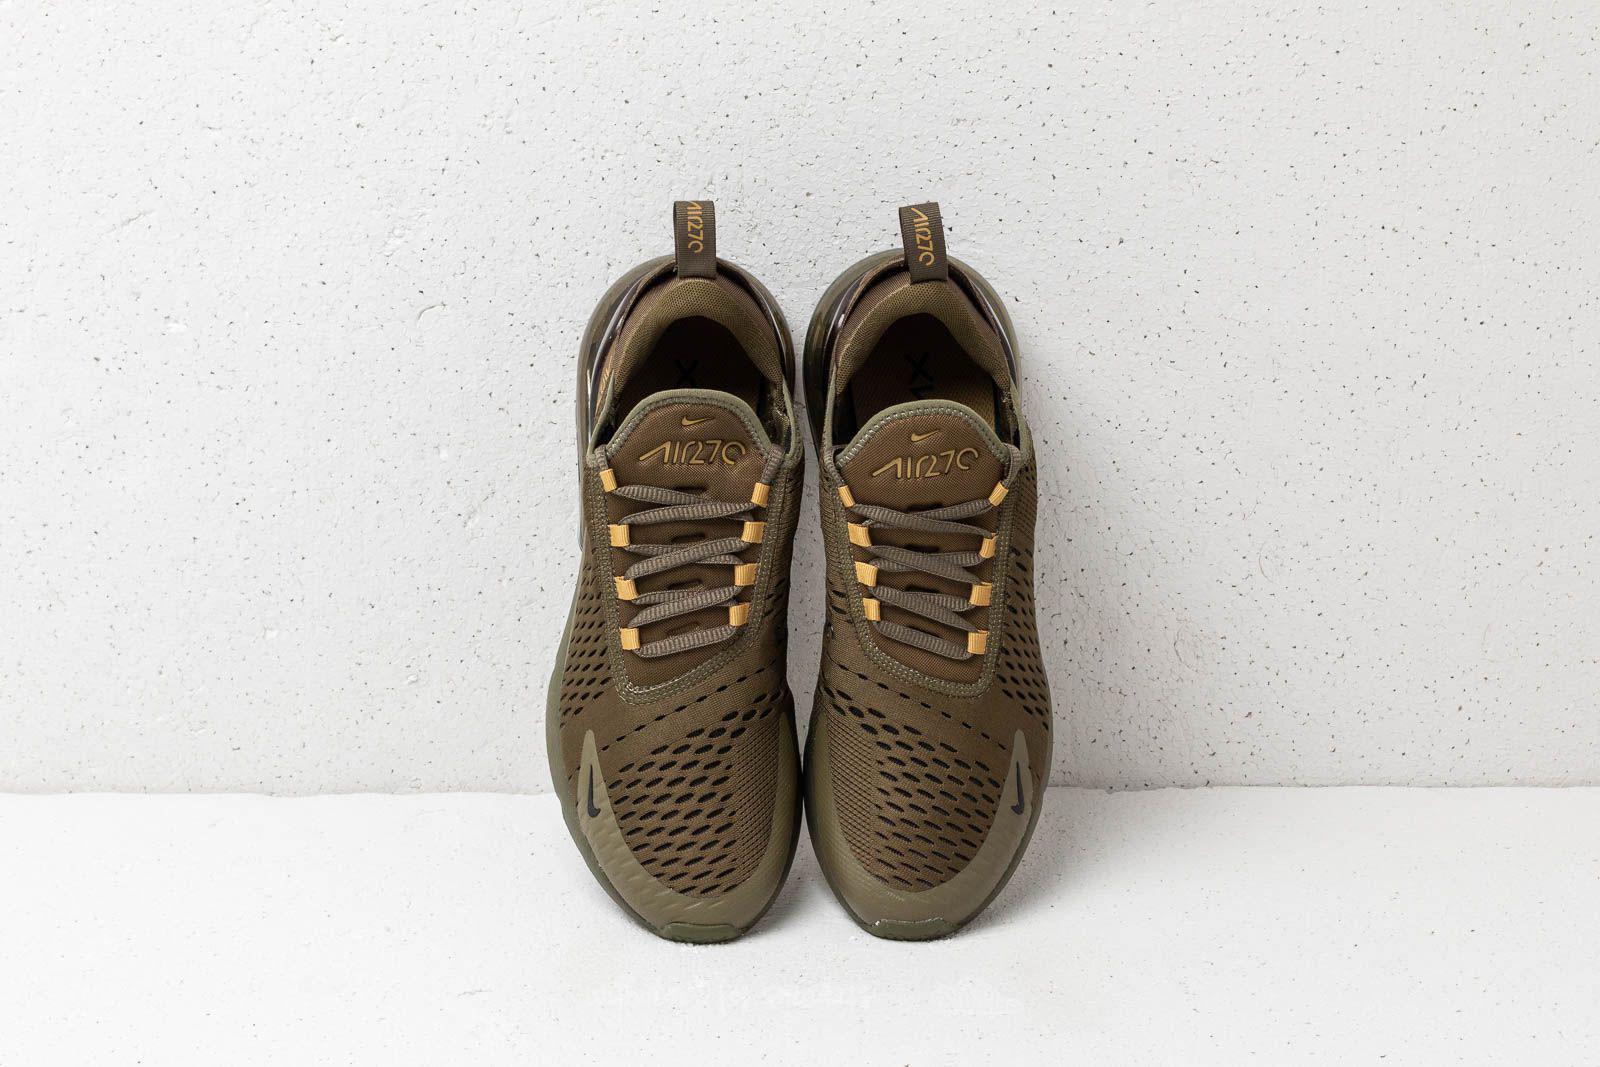 Nike Air Max 270 Olive Canvas/ Black for Men | Lyst